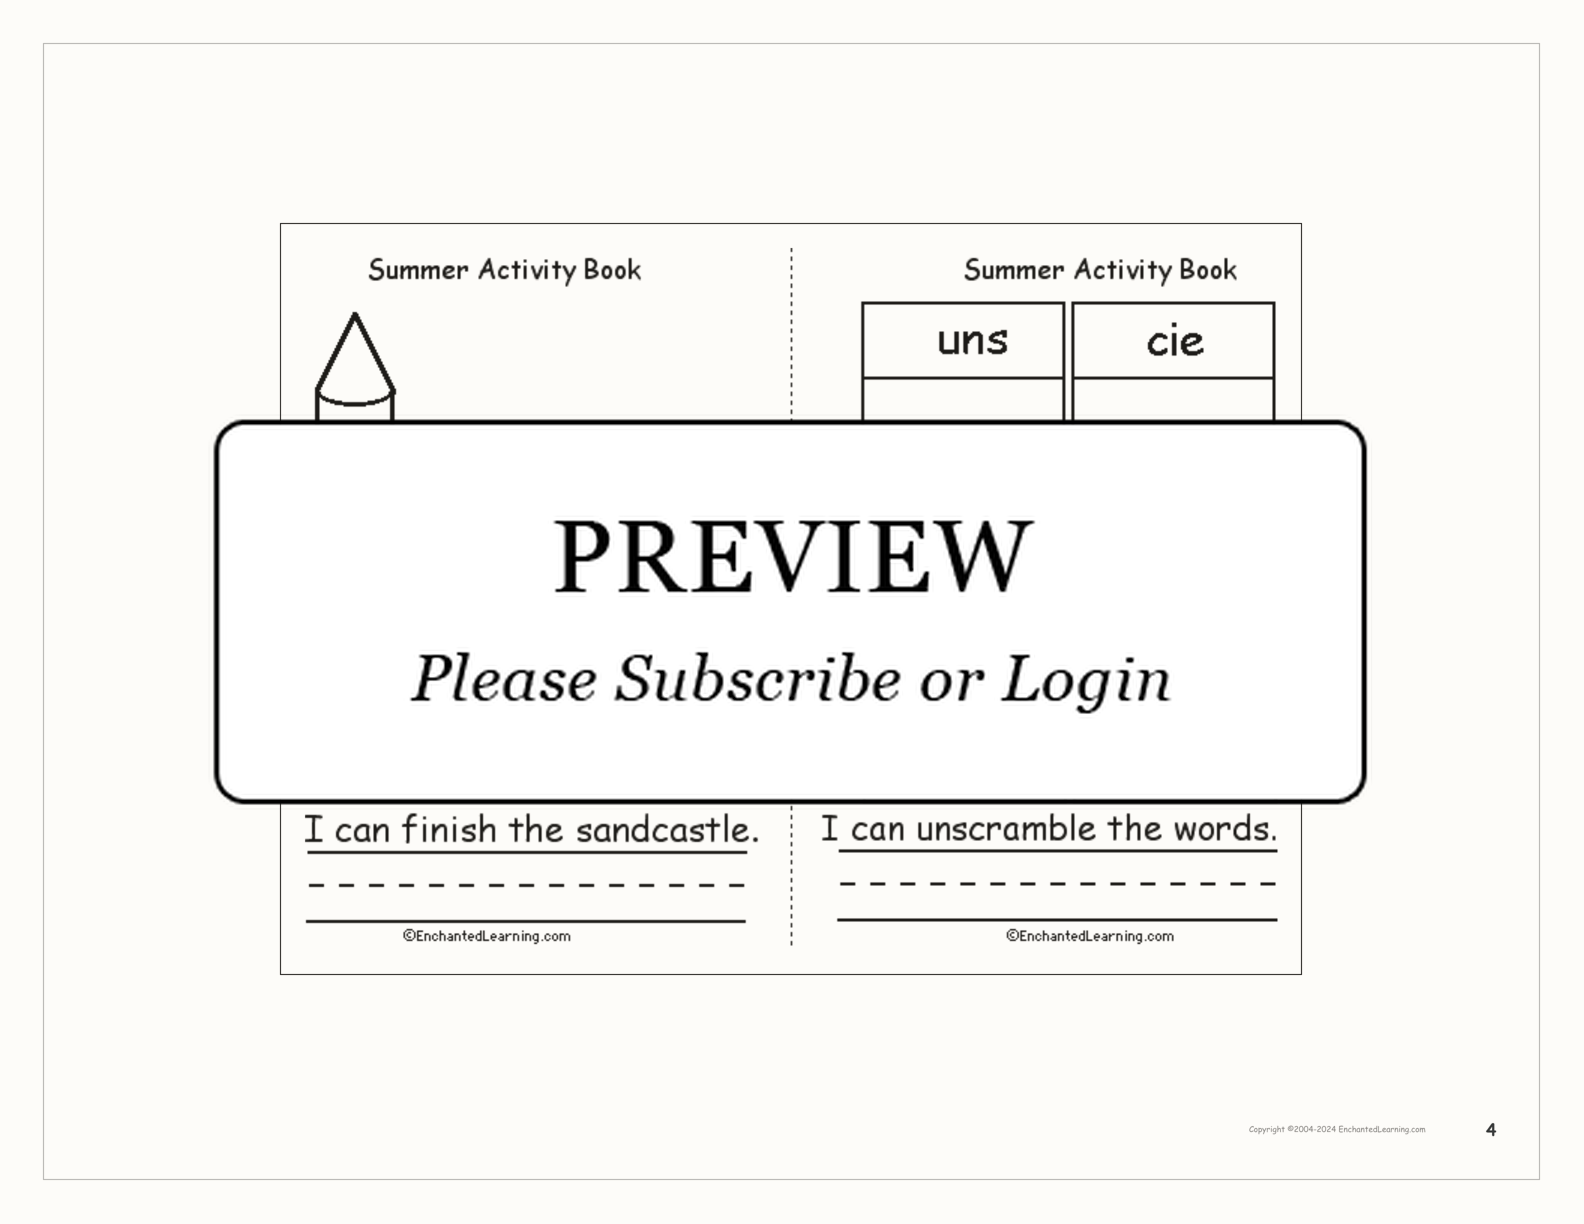 Summer Activity Book interactive worksheet page 4